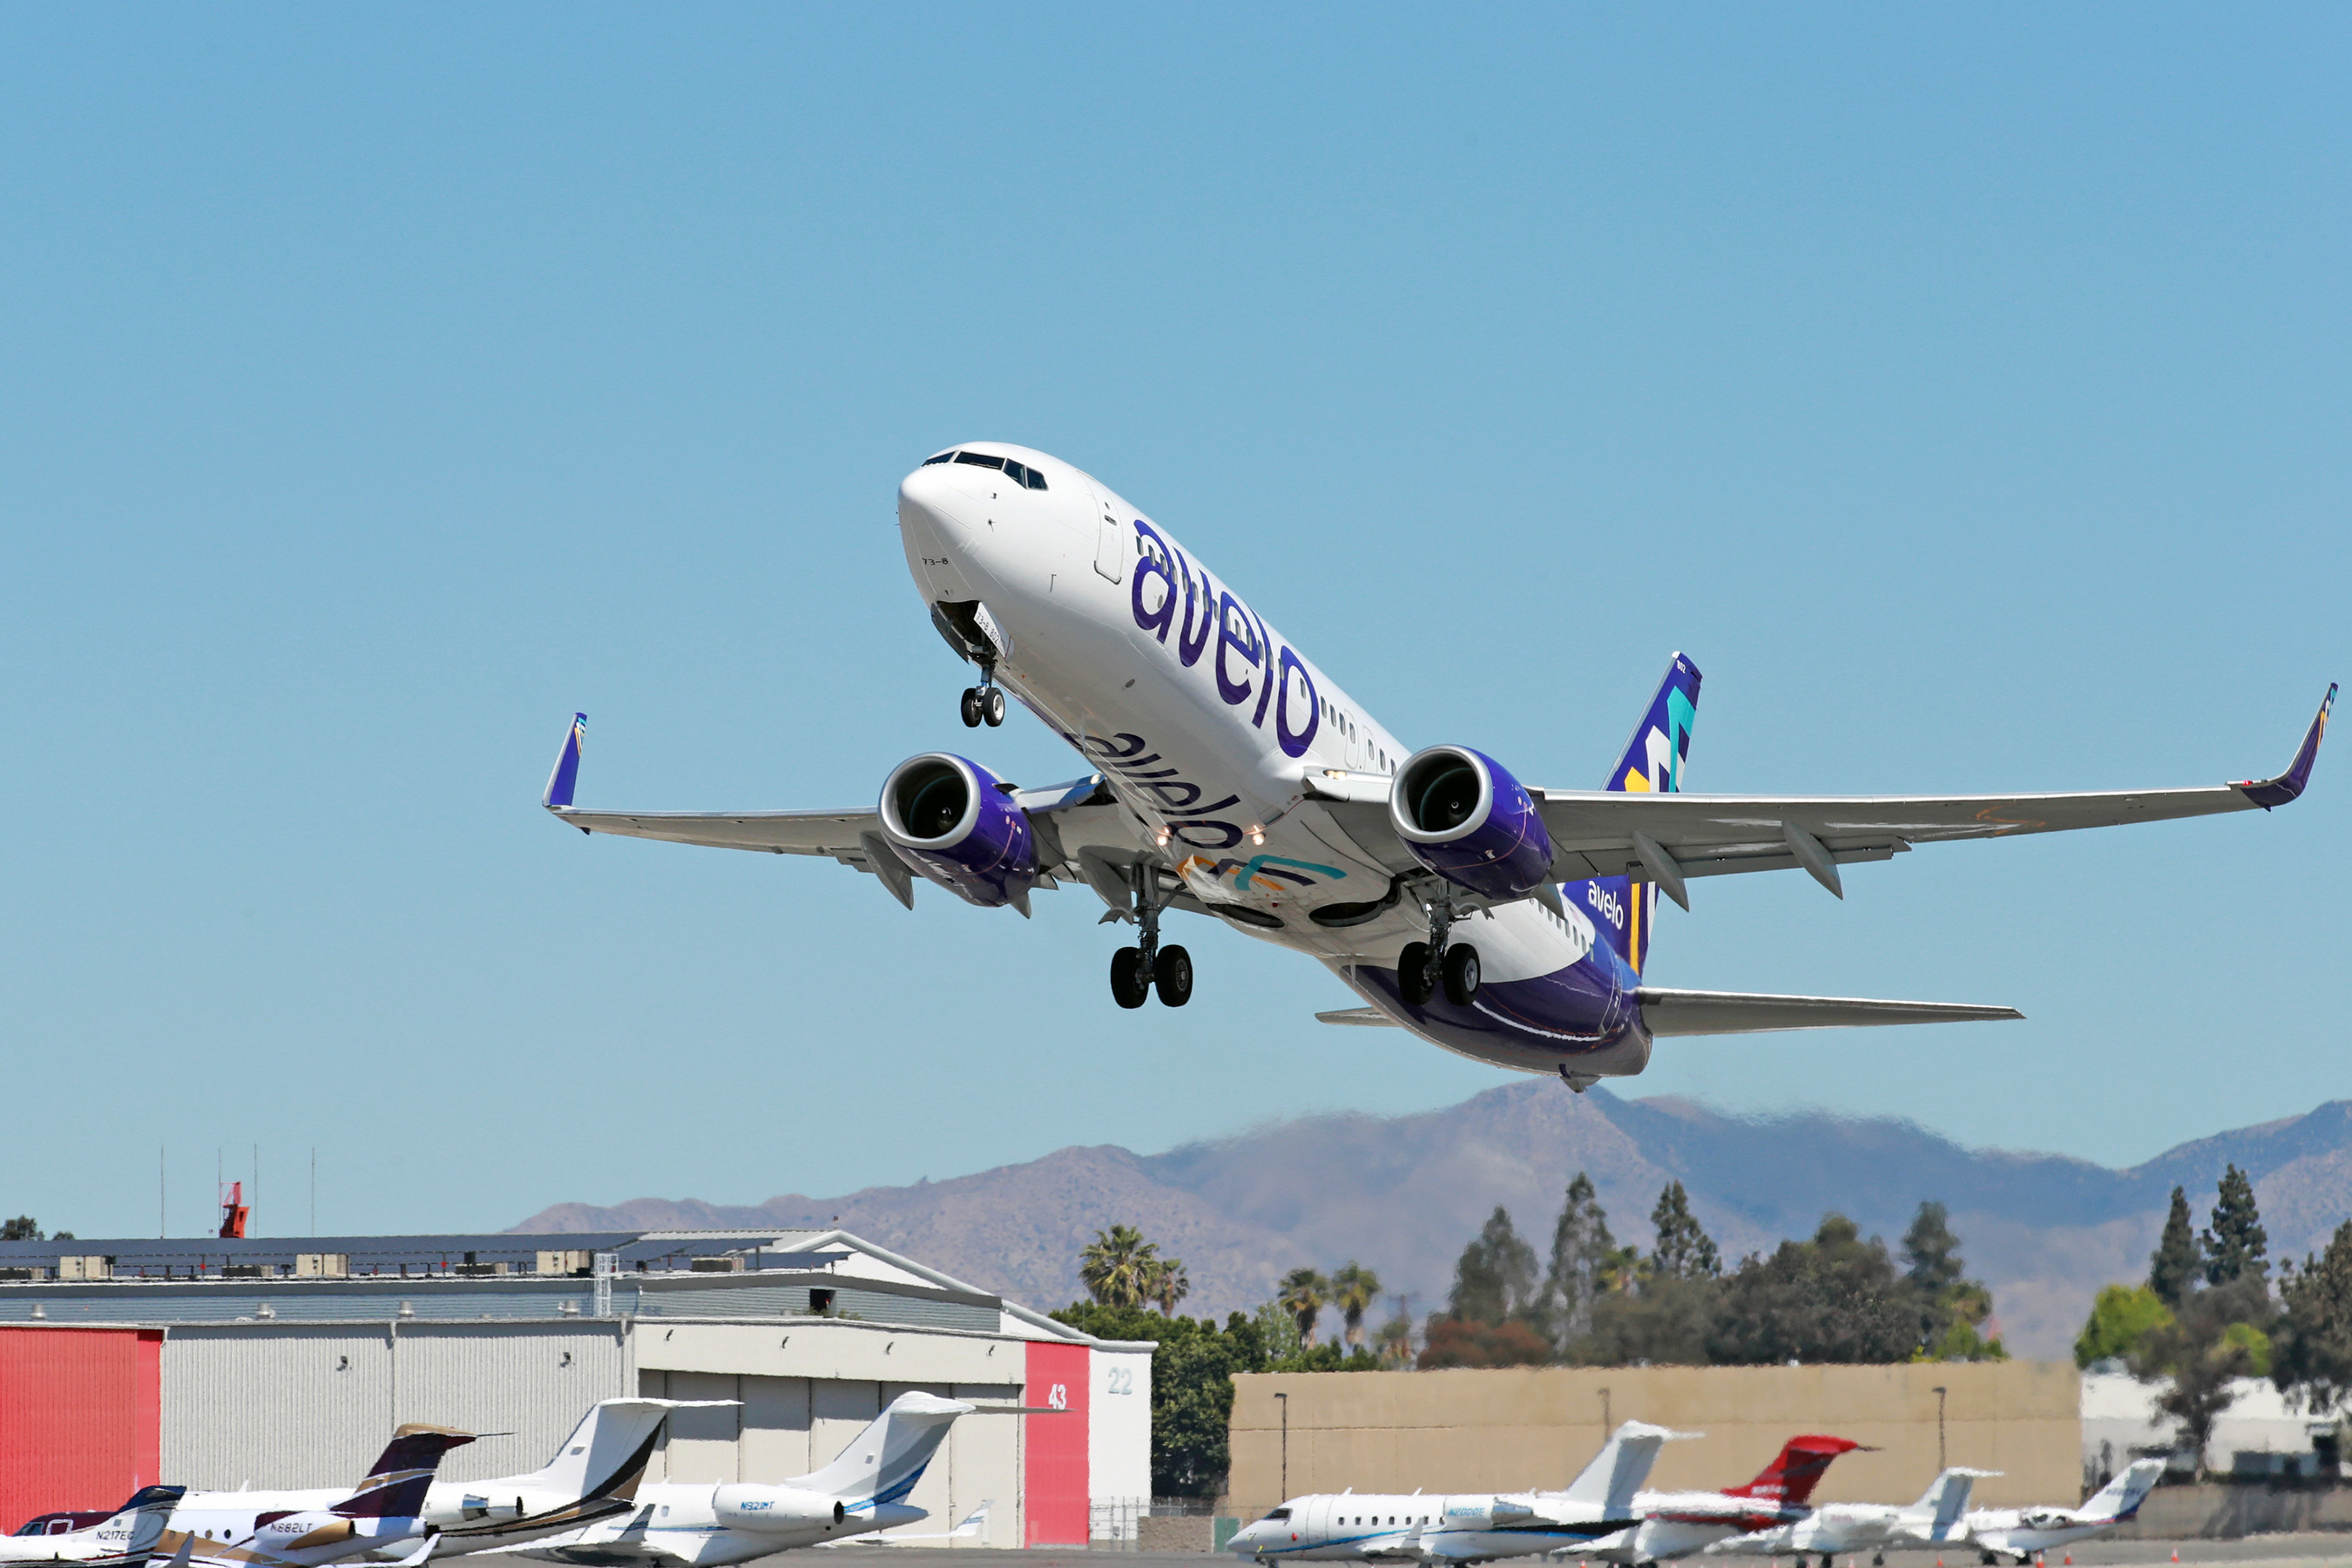 Avelo Airlines takes off from Hollywood Burbank Airport (BUR), Avelo’s first base. The low-fare airline, which launched April 2021, now flies to 43 destinations across the U.S.
(Photo by Joe Scarnici/Getty Images for Avelo Air) (PRNewsfoto/Avelo Airlines)